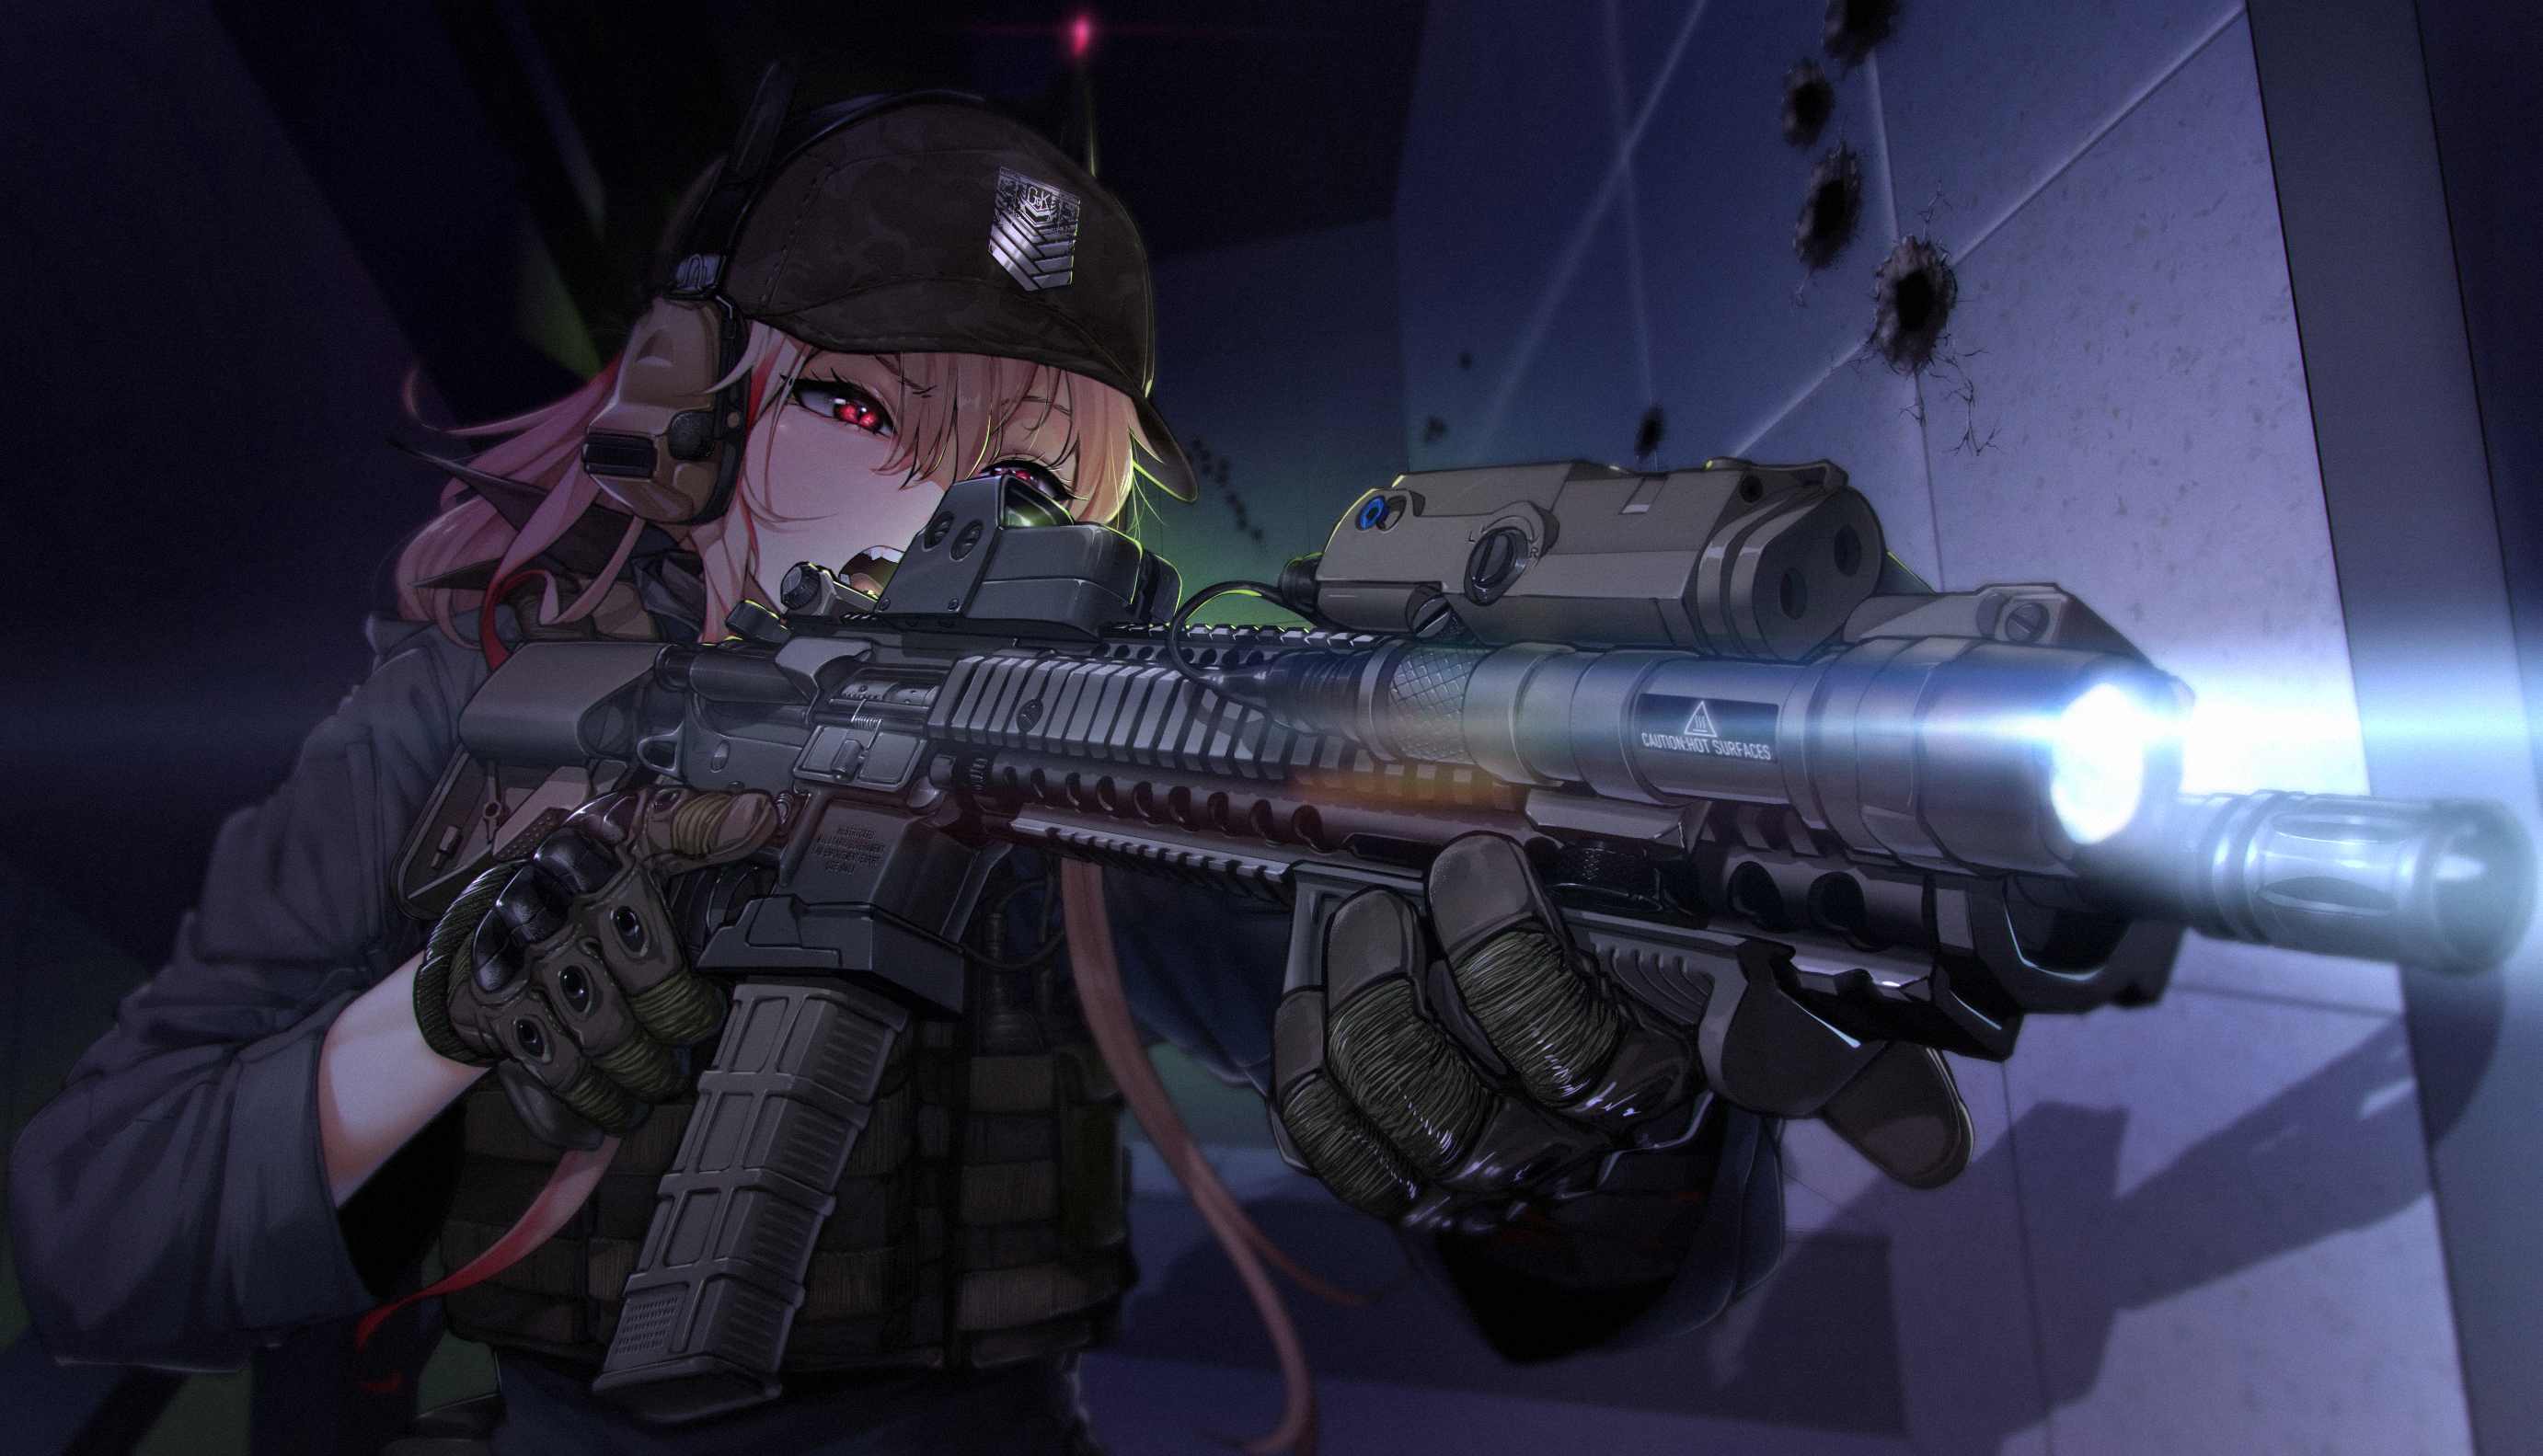 Anime 2764x1583 anime anime girls Girls Frontline black rifle gloves hat long hair M4 pink hair red eyes open mouth tactical headsets weapon flashlight M4 SOPMOD II (Girls Frontline) Sd Bigpie